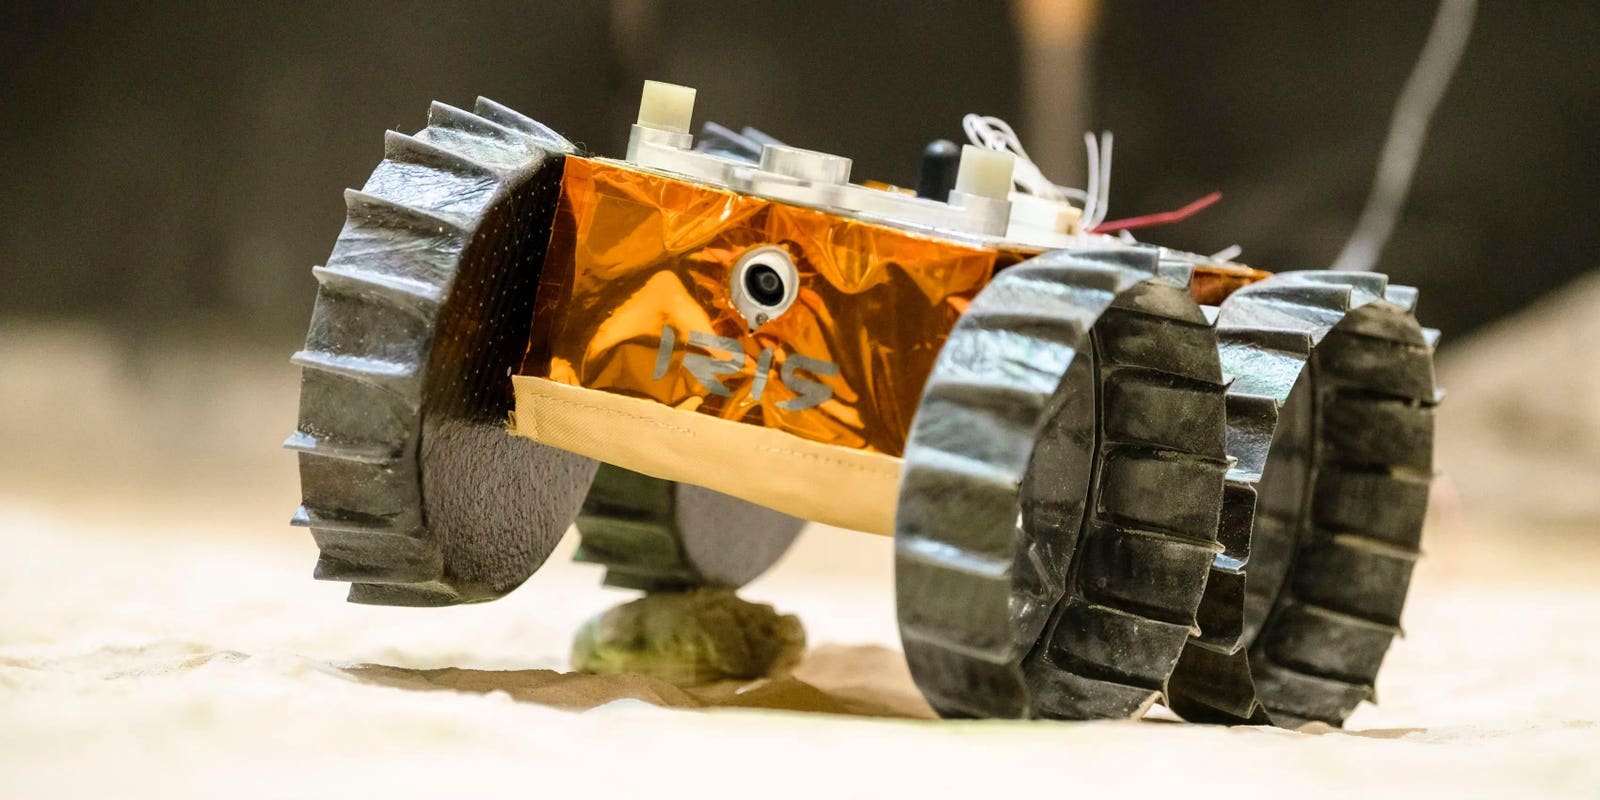 Iris, The World’s First Nano Lunar Rover: What We Learned